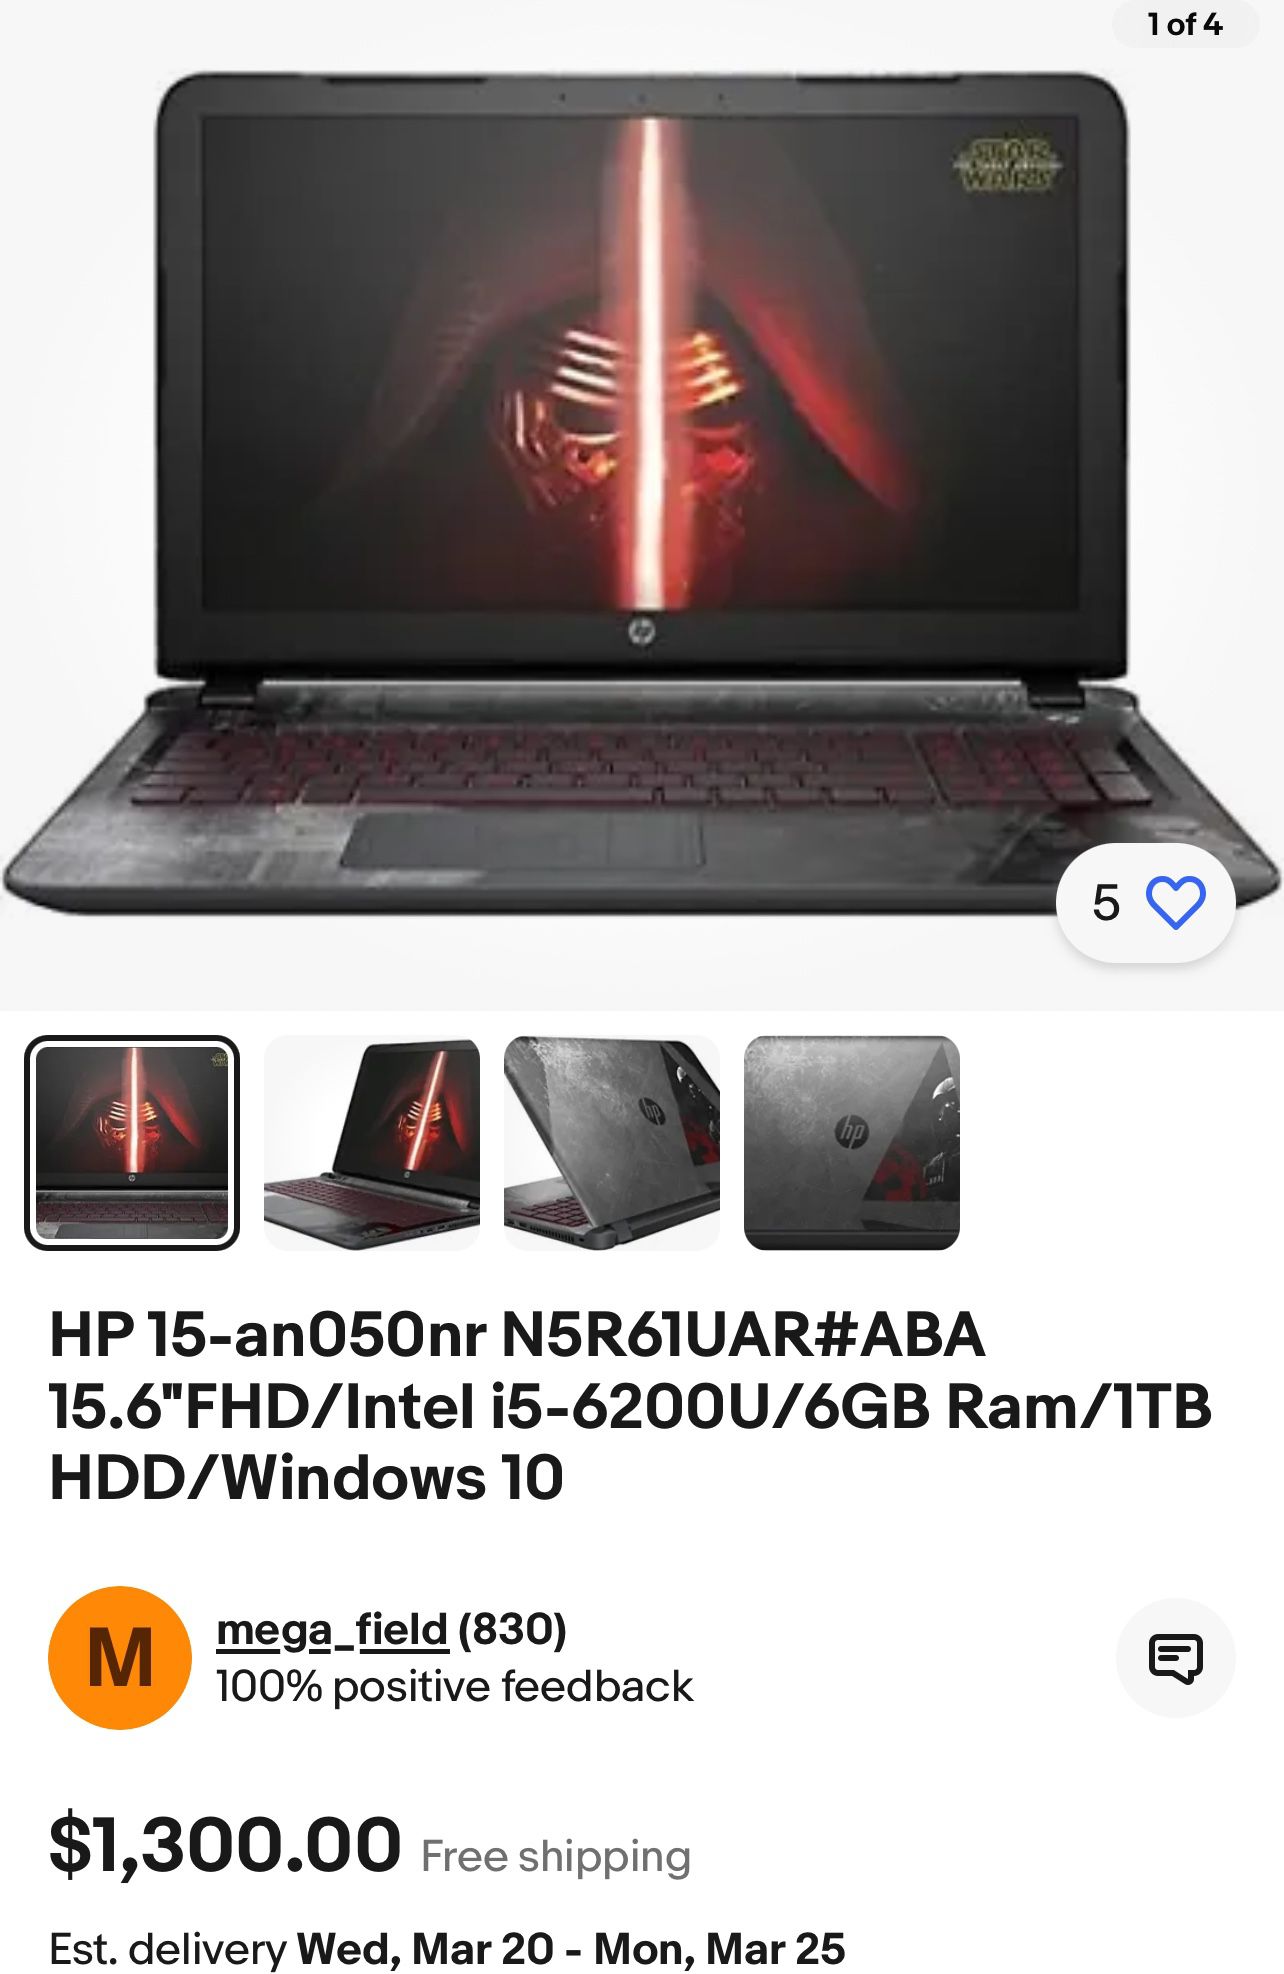 Rare Discontinued HP Star Wars Special Edition 15.6" Full HD Laptop,